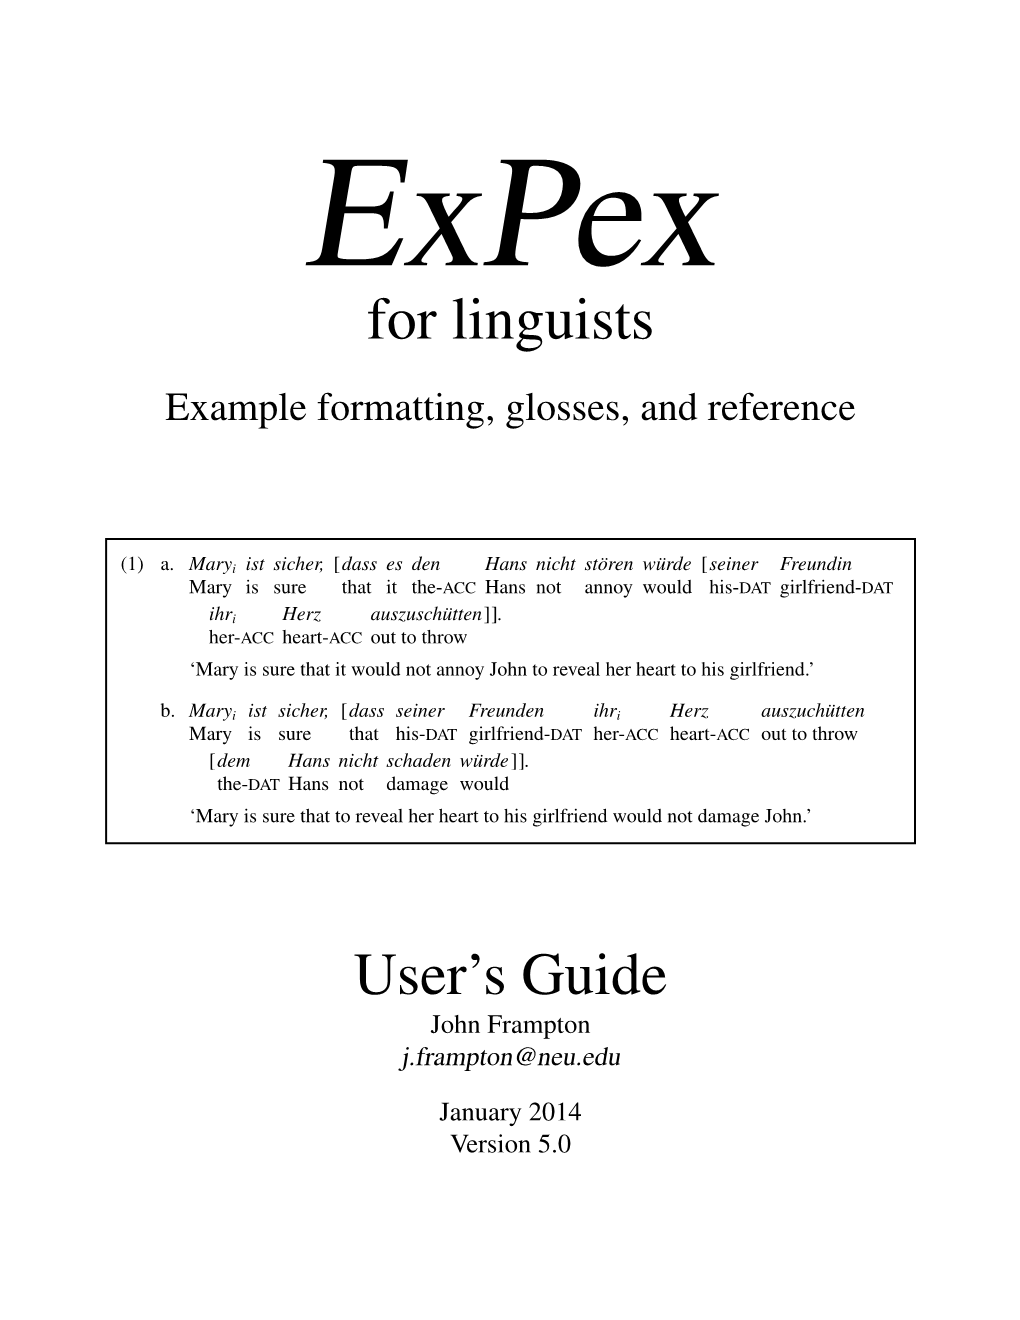 For Linguists User's Guide